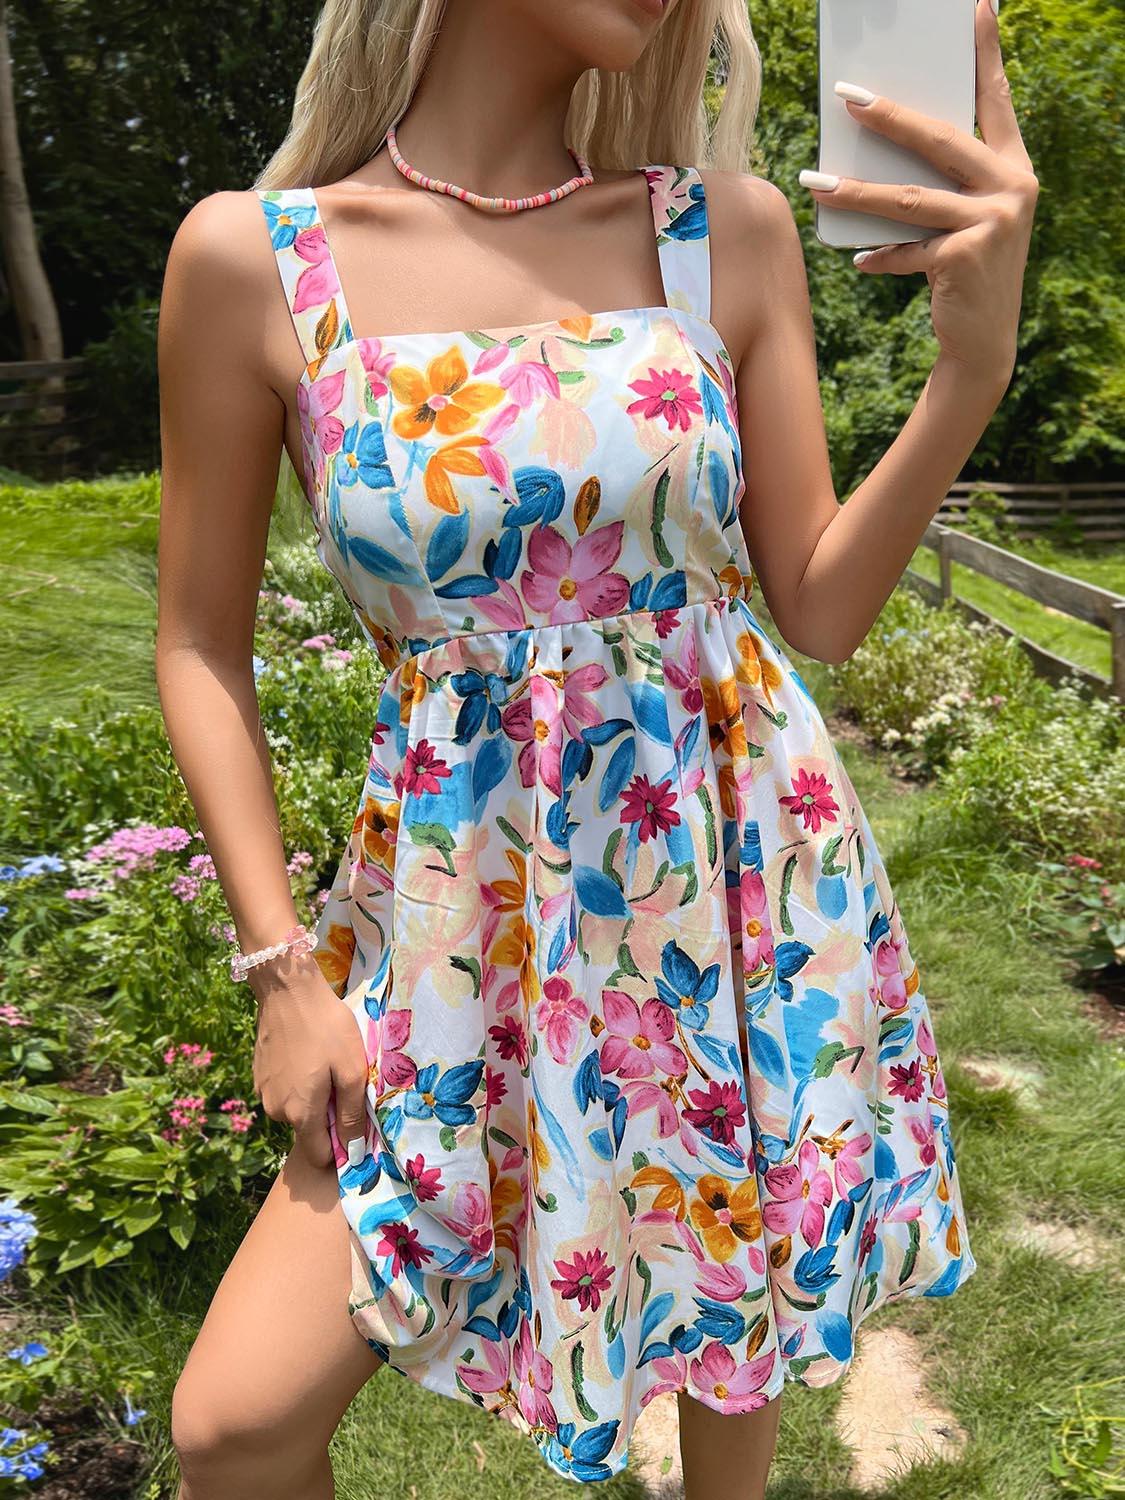 a woman in a floral dress holding a cell phone